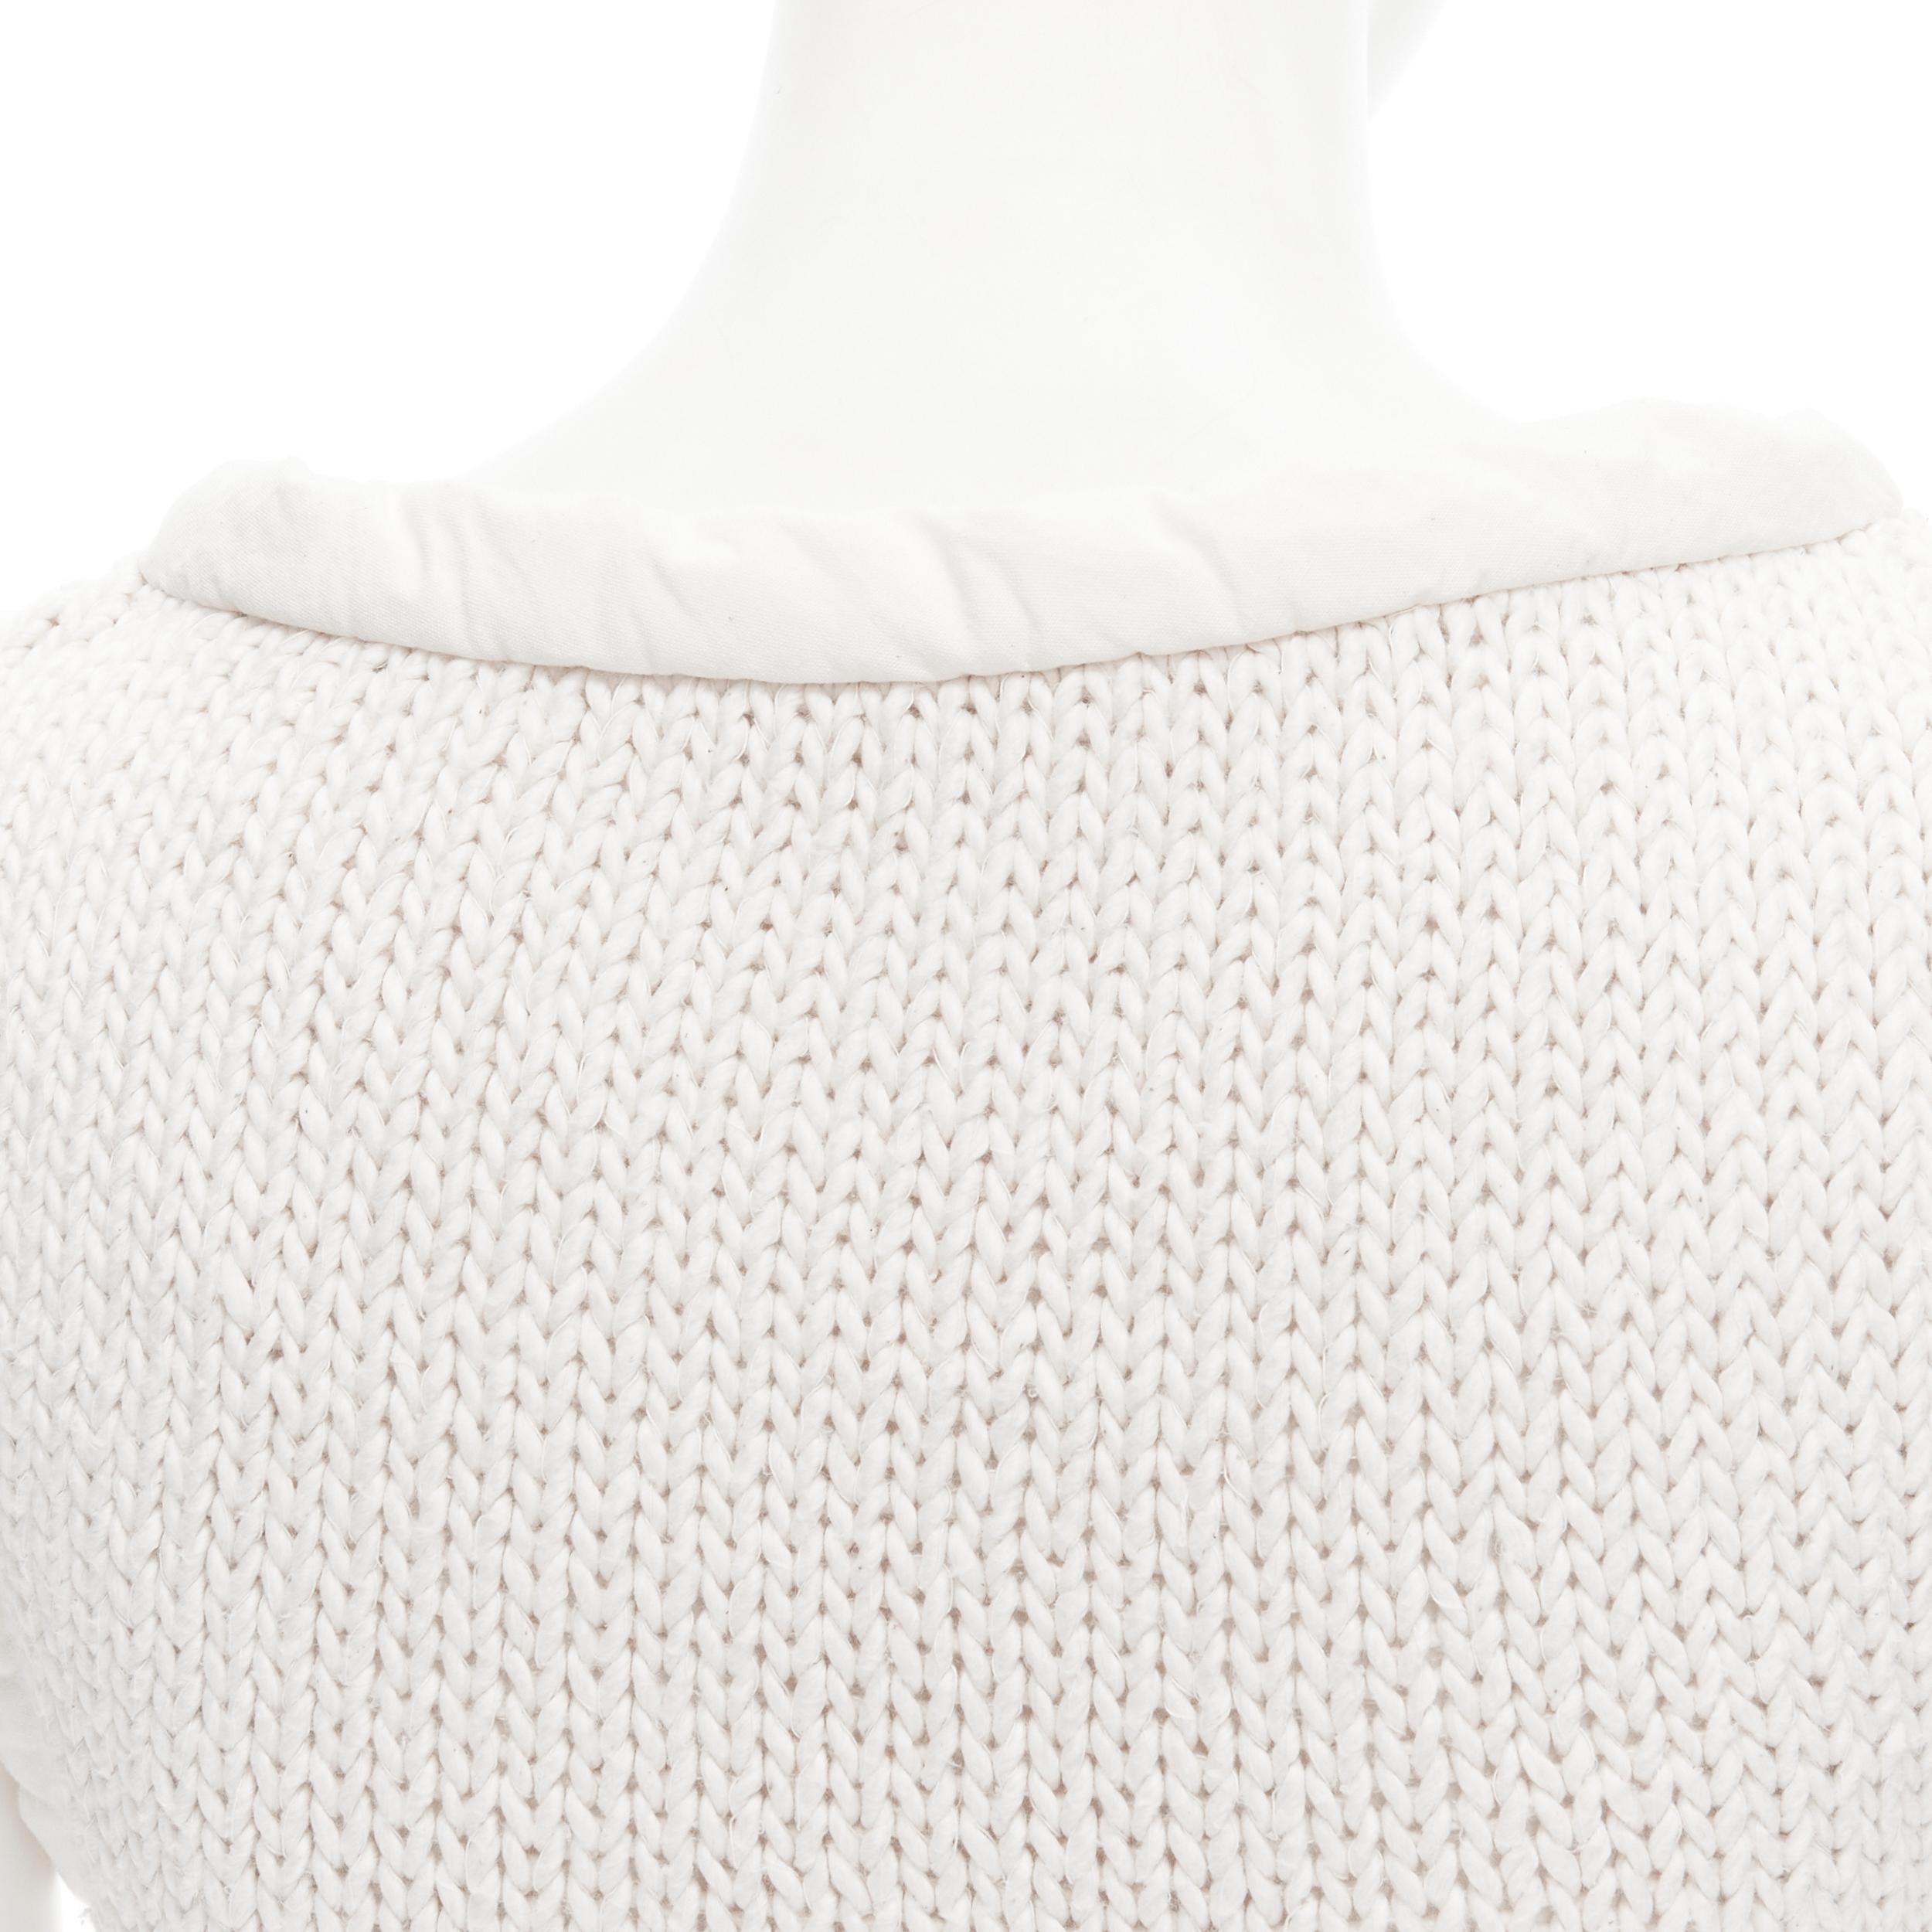 OLD CELINE Phoebe Philo white hand knit padded trim tunic vest XS For Sale 4